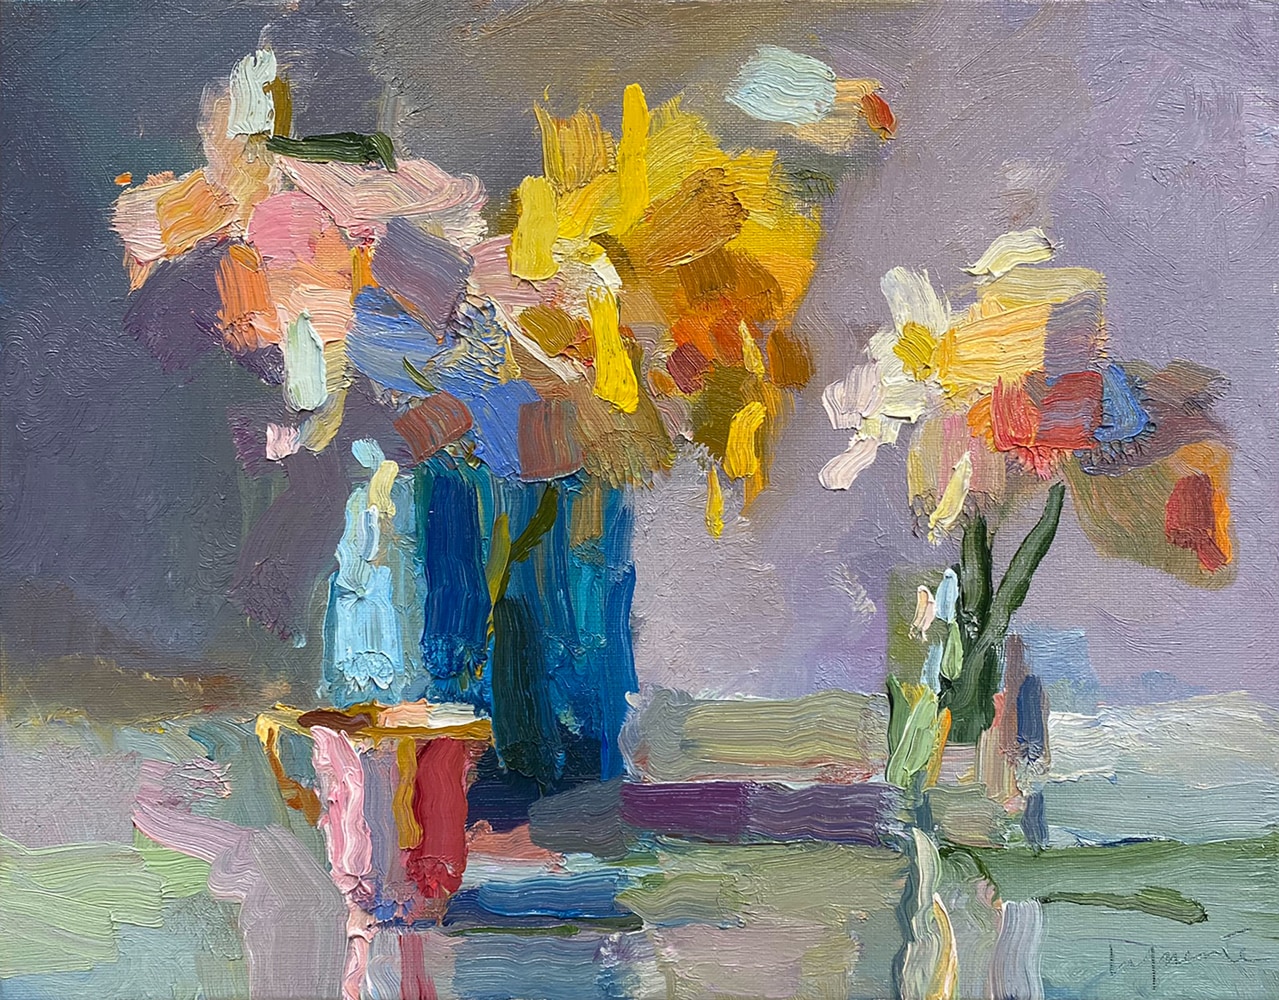 Daffodils And Teacup

11&amp;quot; x 14&amp;quot;

Oil On Linen

Shop

&amp;nbsp;